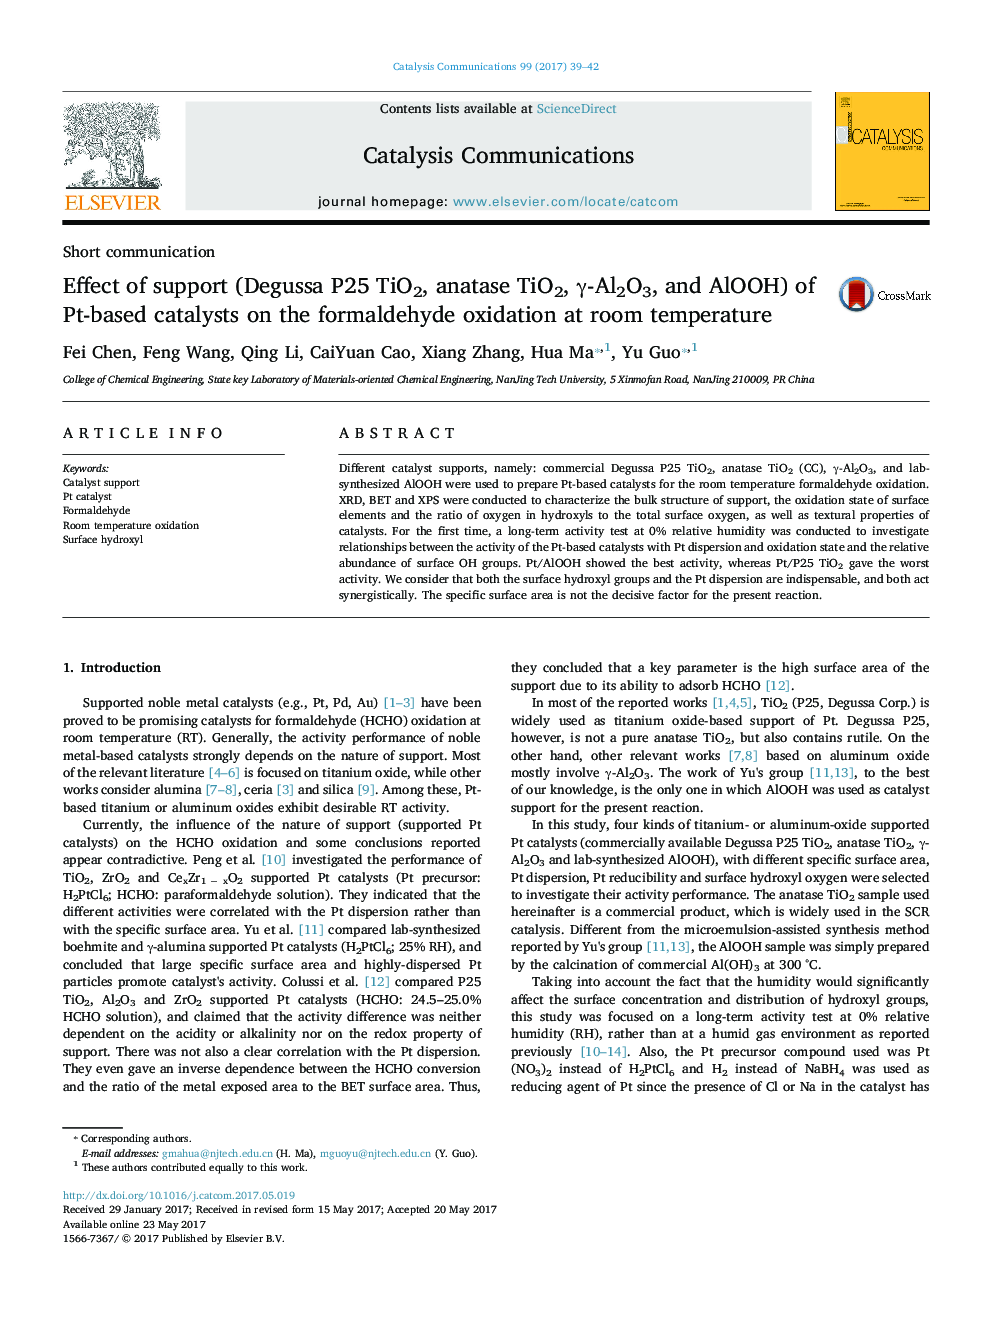 Effect of support (Degussa P25 TiO2, anatase TiO2, Î³-Al2O3, and AlOOH) of Pt-based catalysts on the formaldehyde oxidation at room temperature